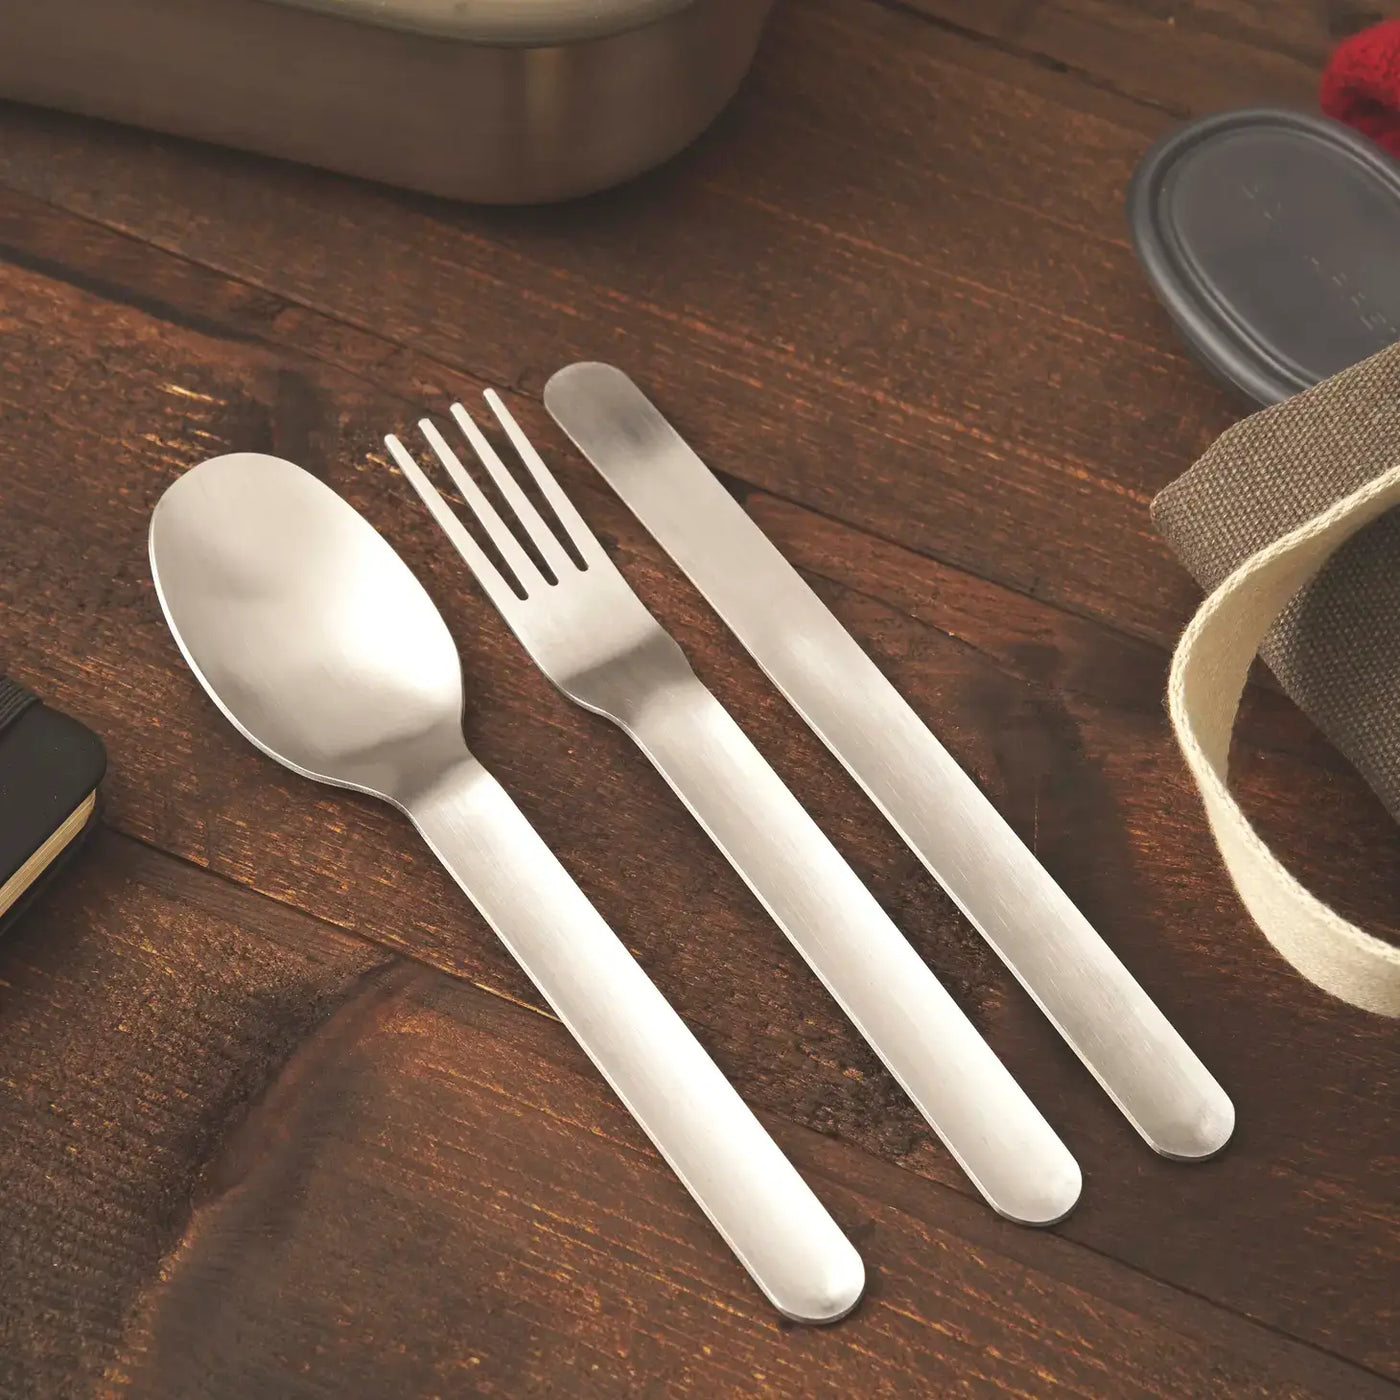 Cutlery Set with Portable Hygienic Carry Case